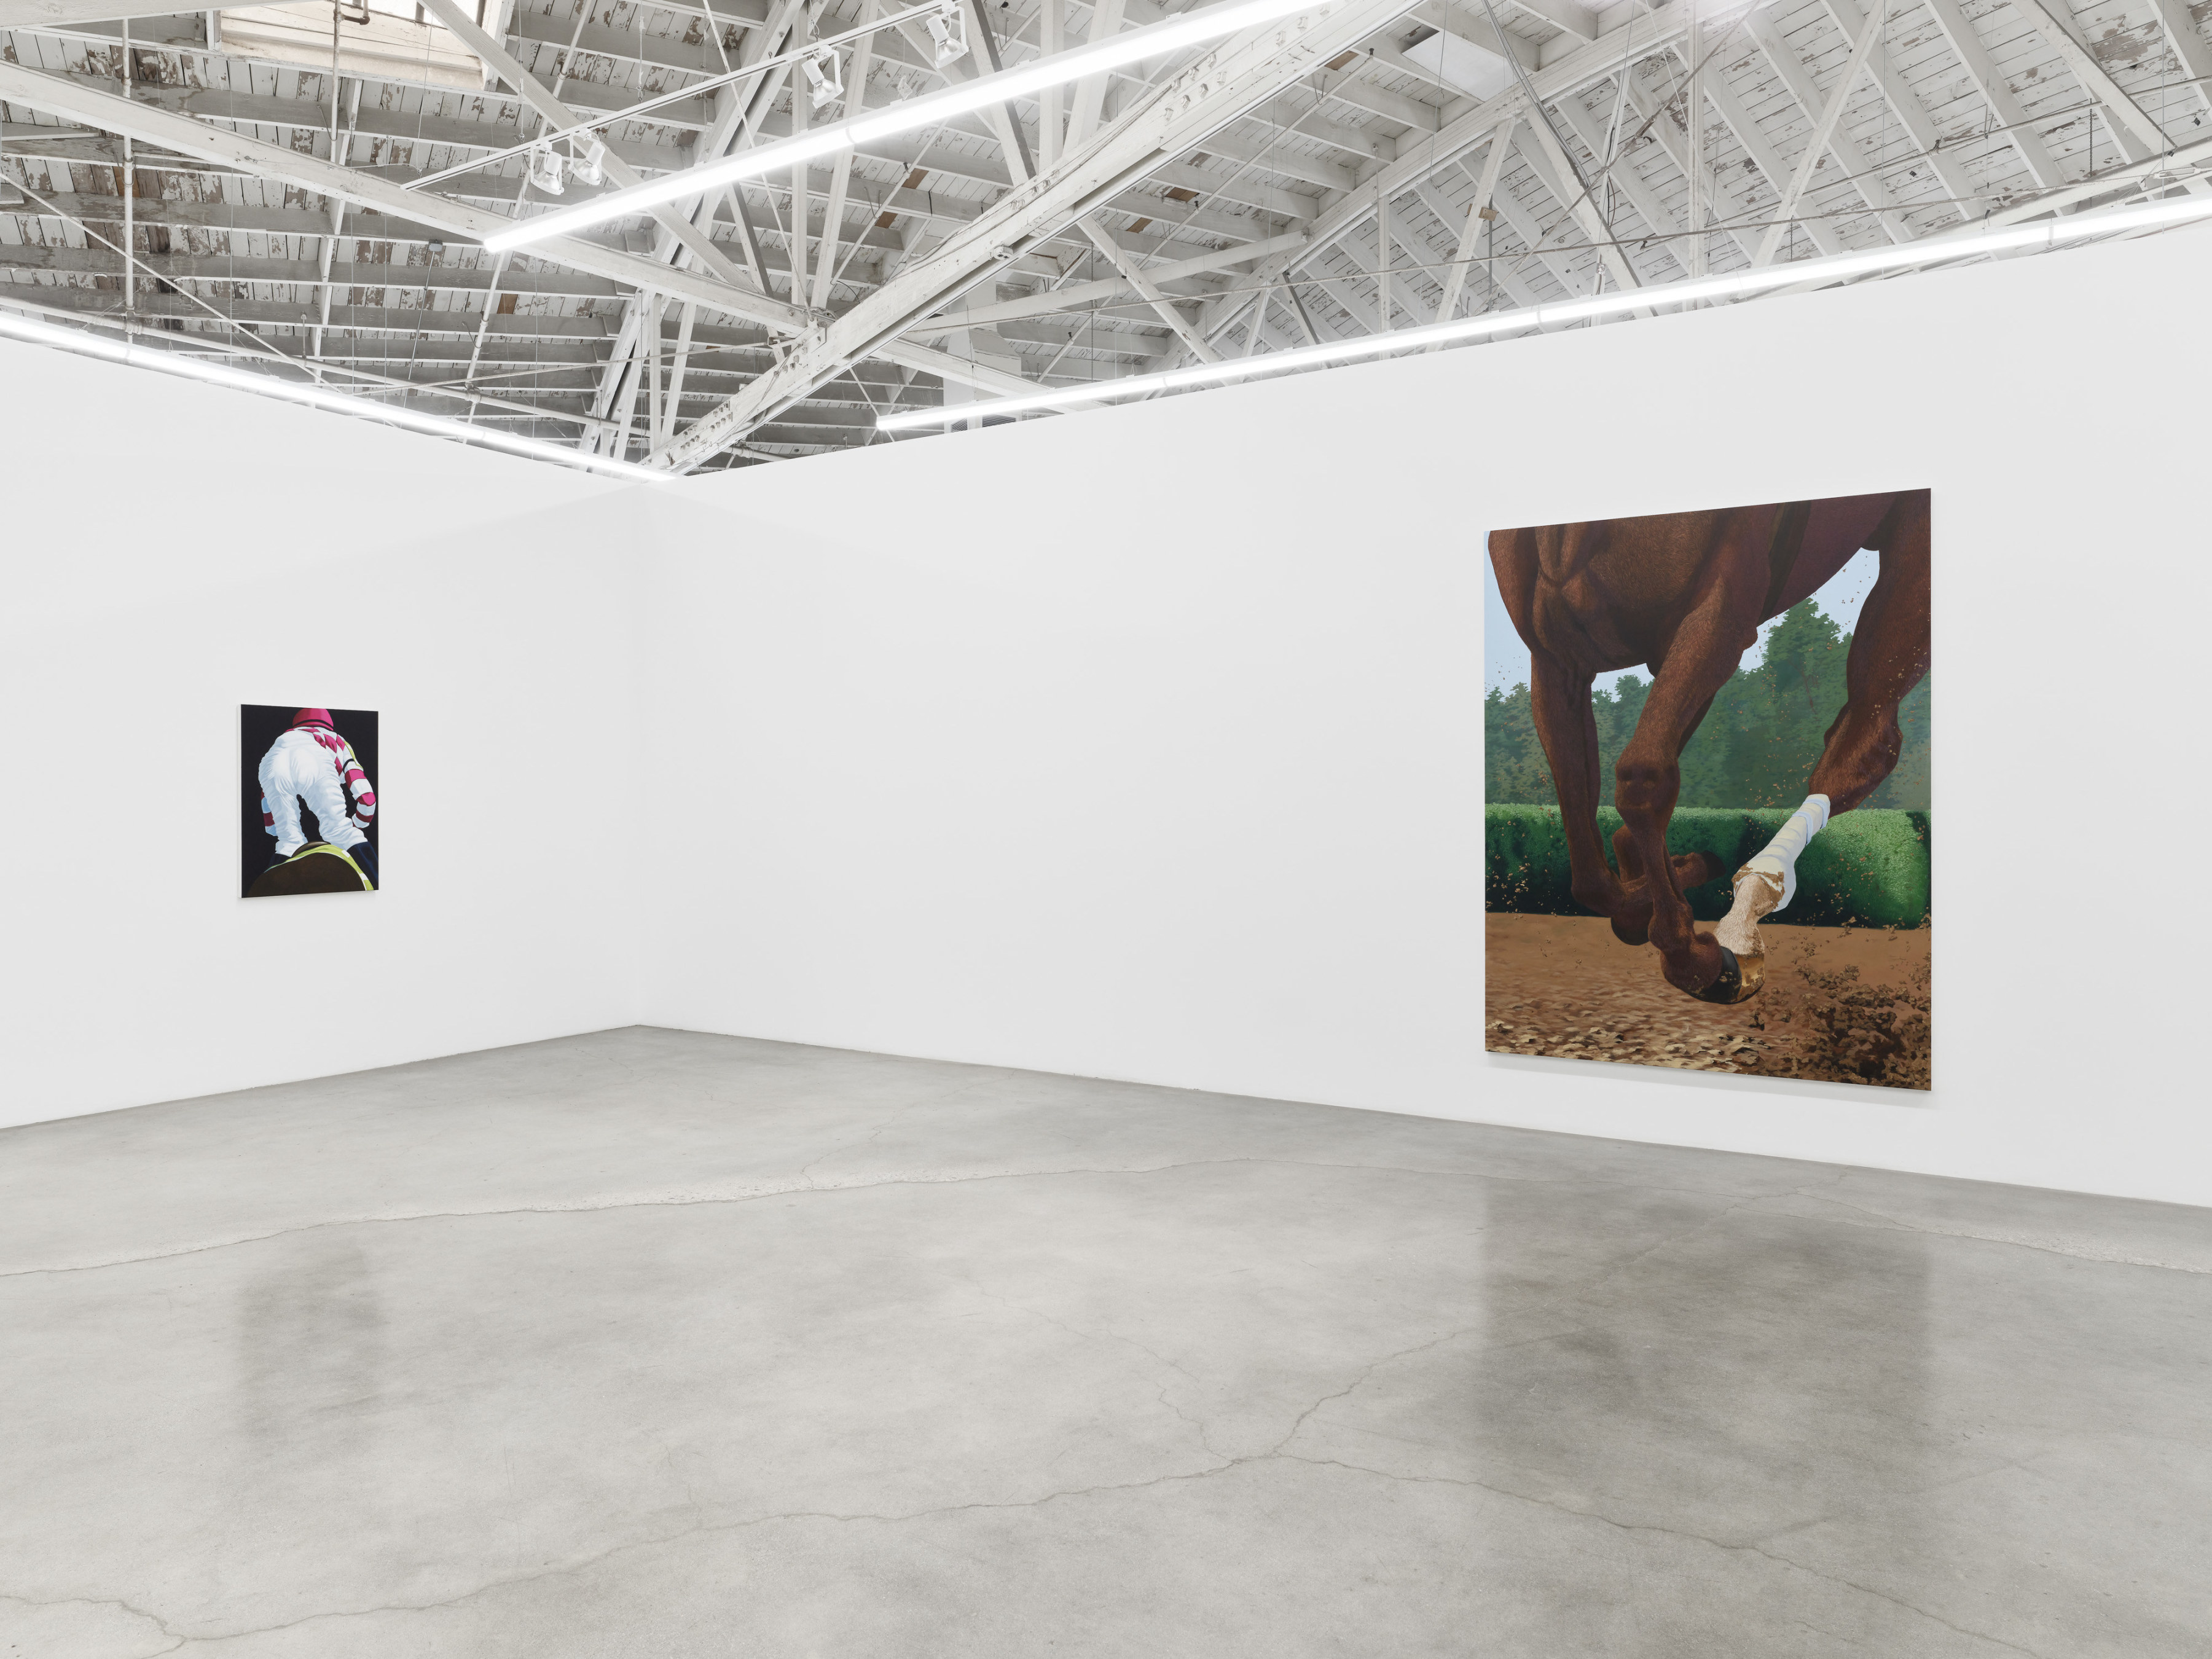 Installation image of Sarah Miska's "High Stakes" at Night Gallery, Los Angeles. 